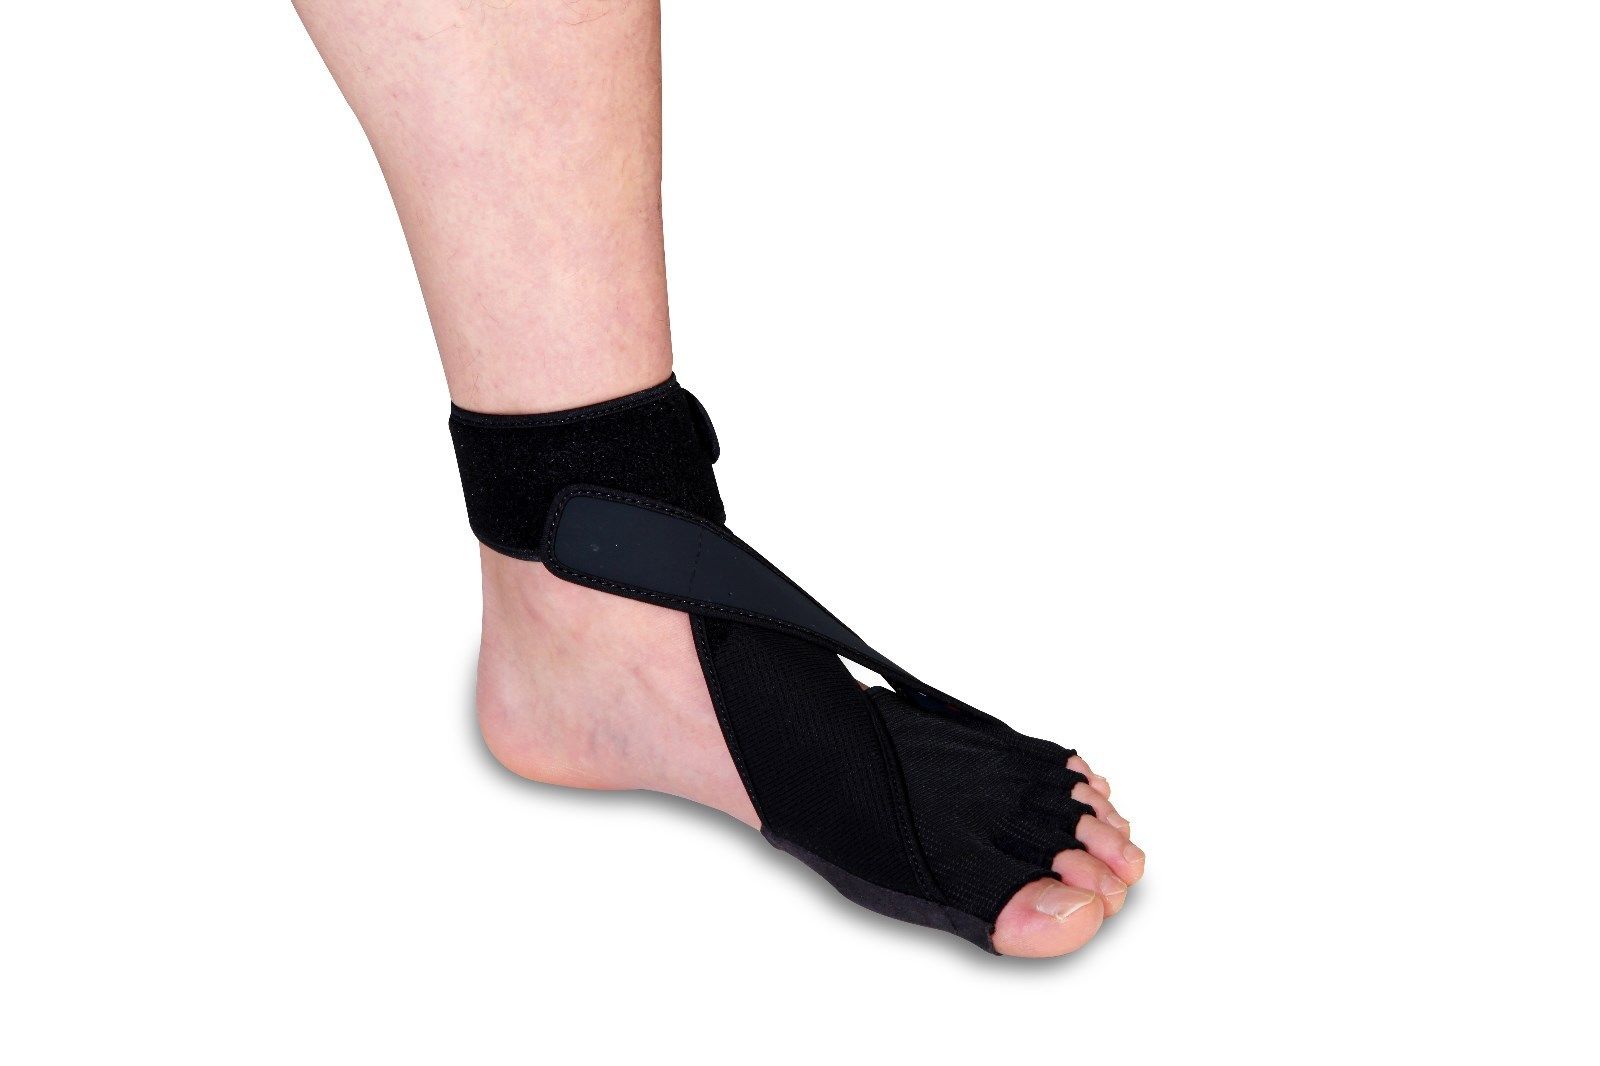 Seagate Foot Pain